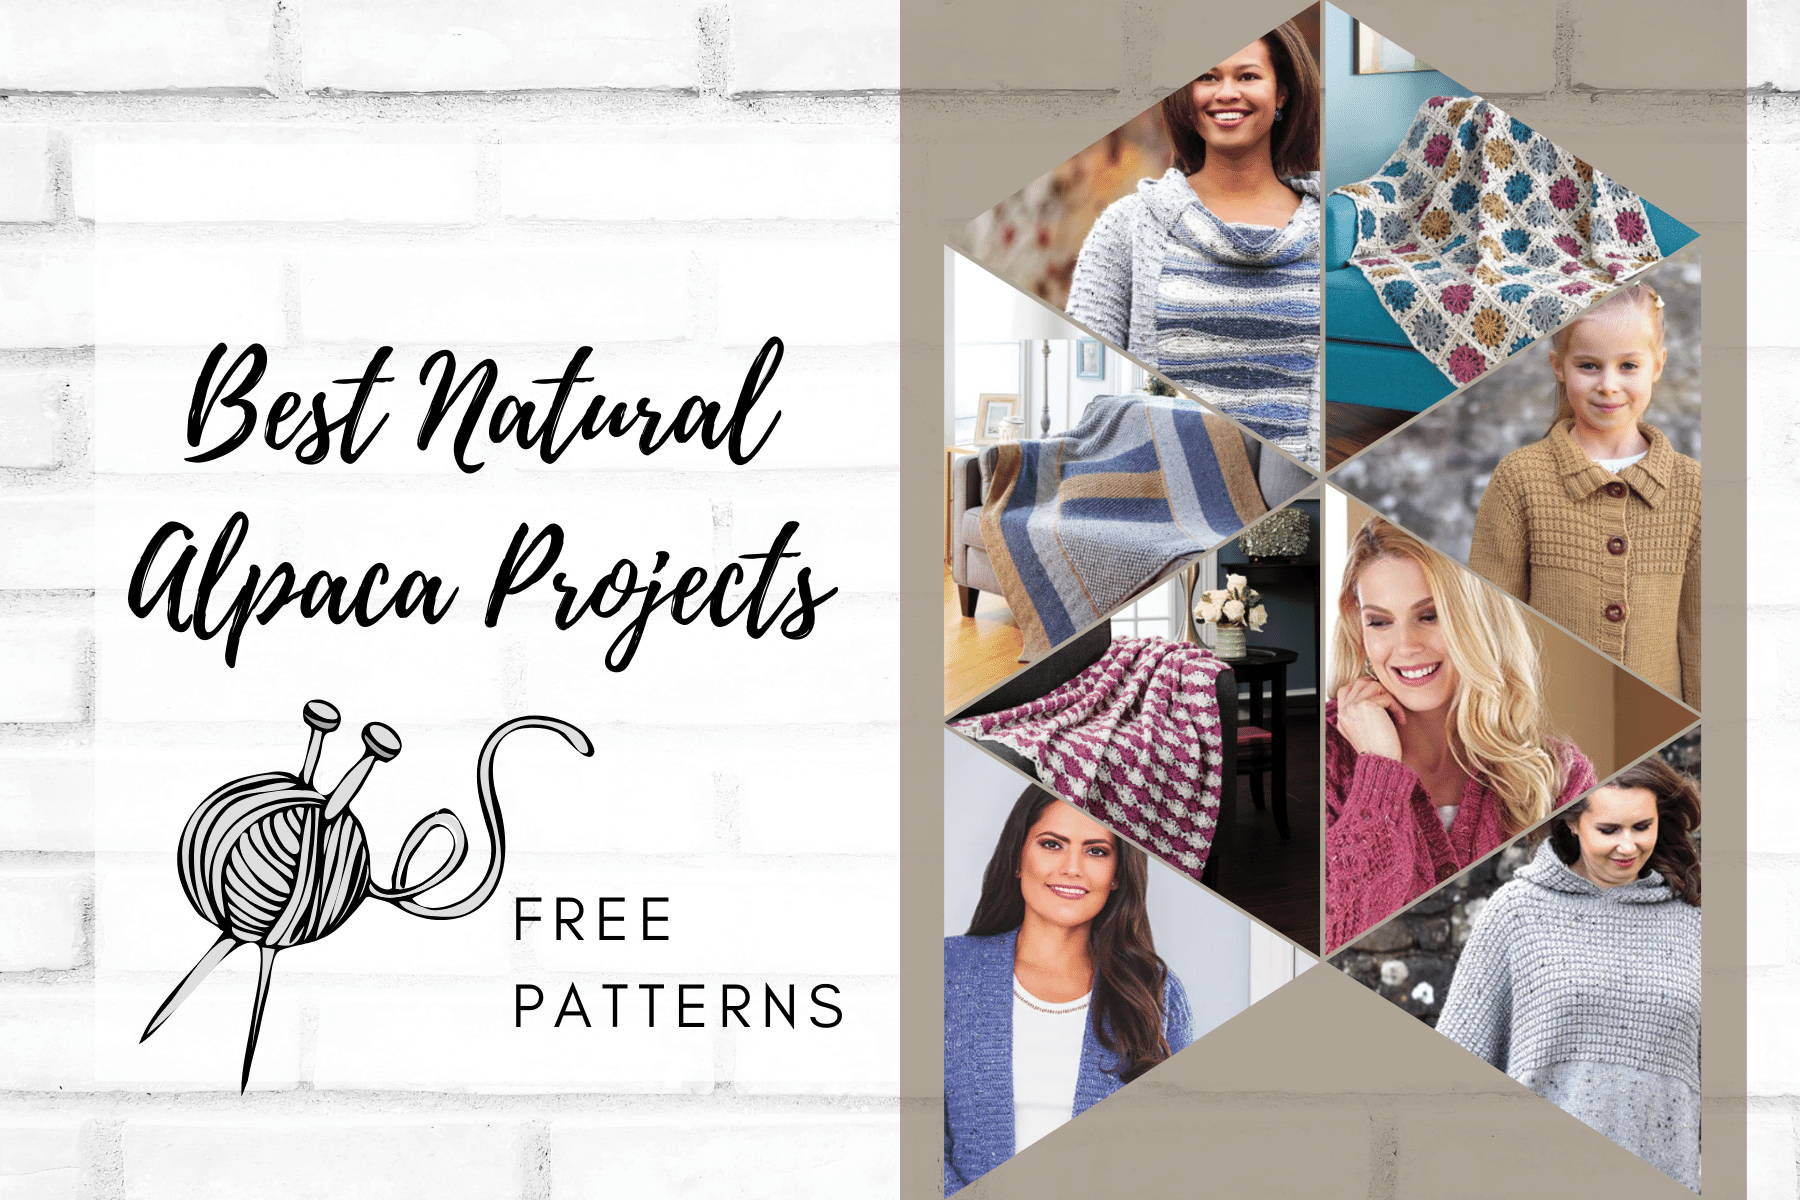 Best Natural Alpaca Projects for Knit and Crochet